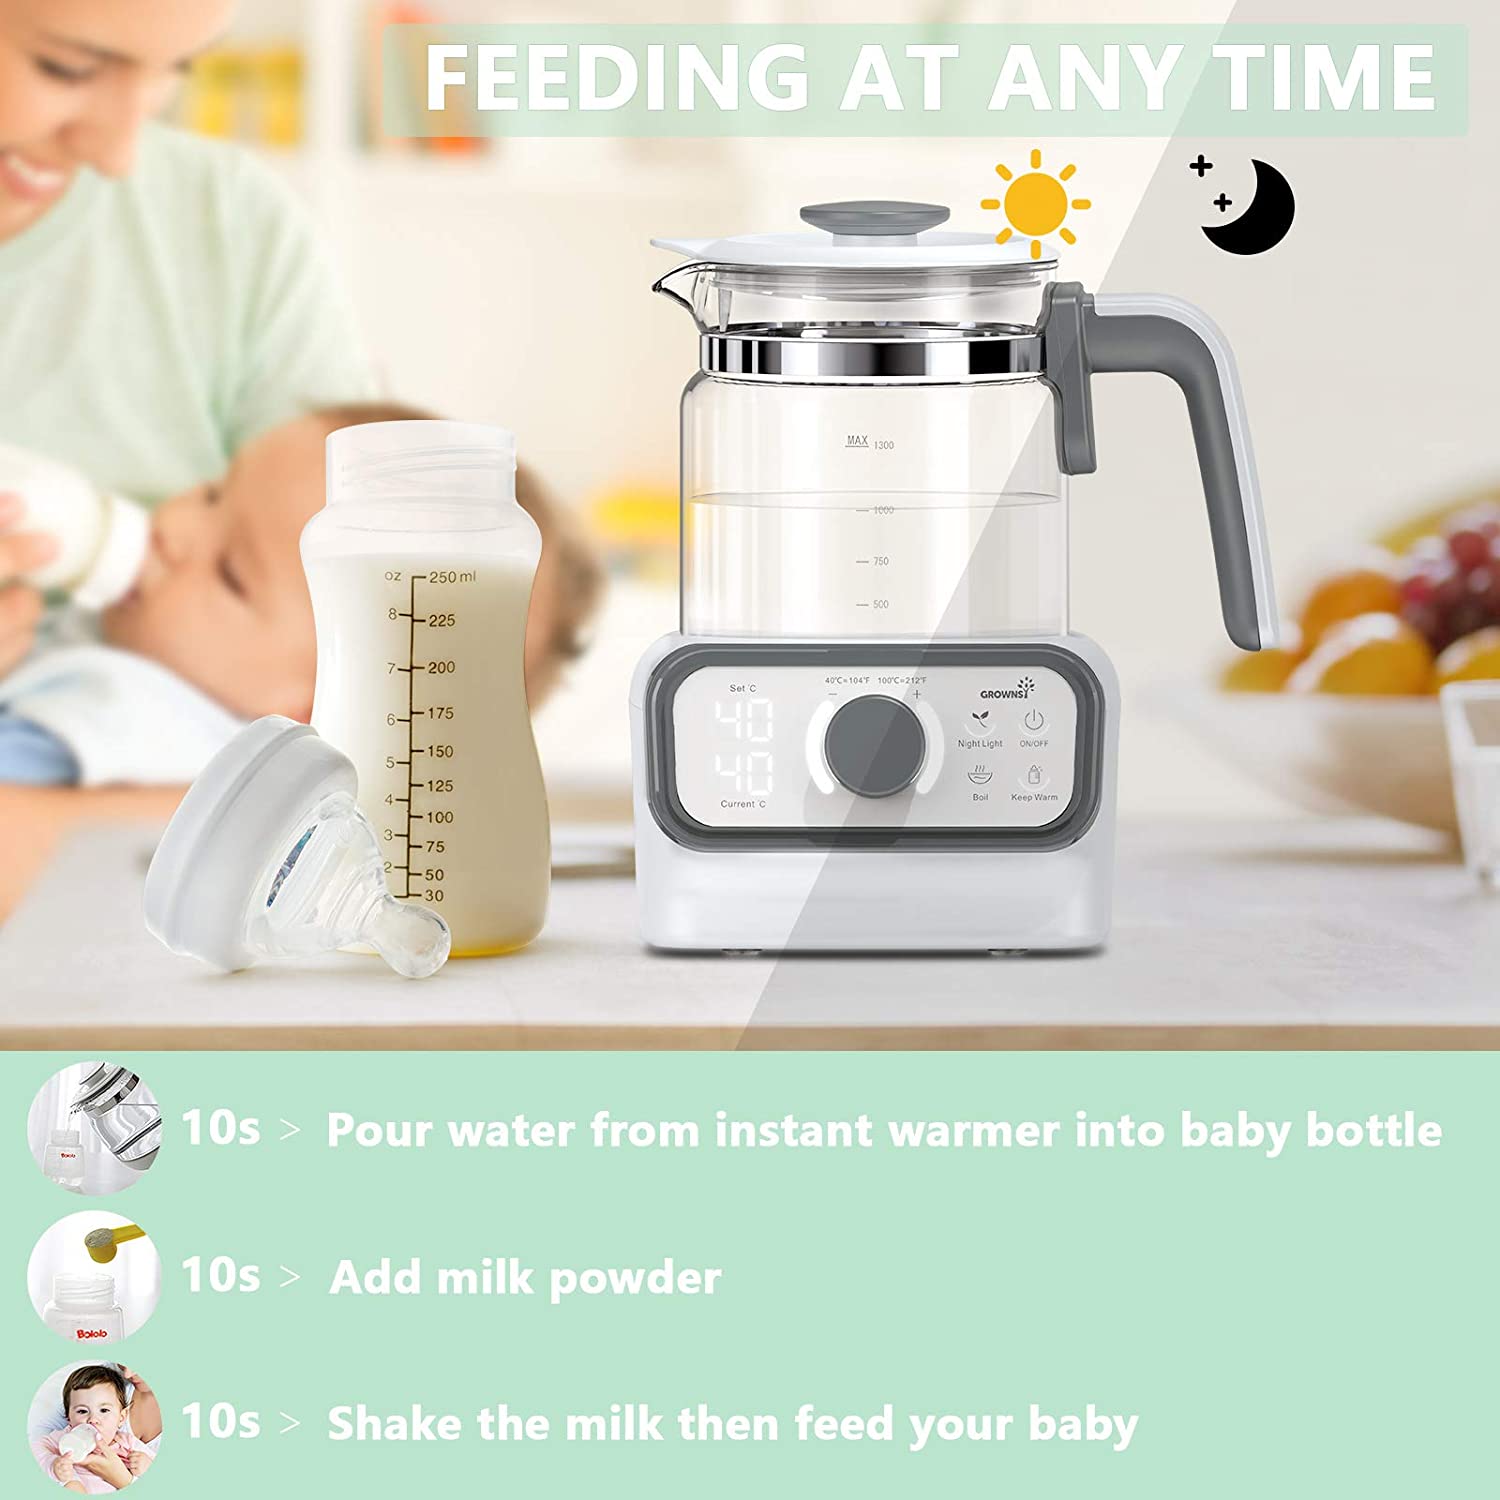 Bellababy Instant Baby Bottle Warmer, Warm Water Dispenser for Making  Formula Bottle Instantly,Detachable Container Easy Cleaning,24/7 Keep Warm